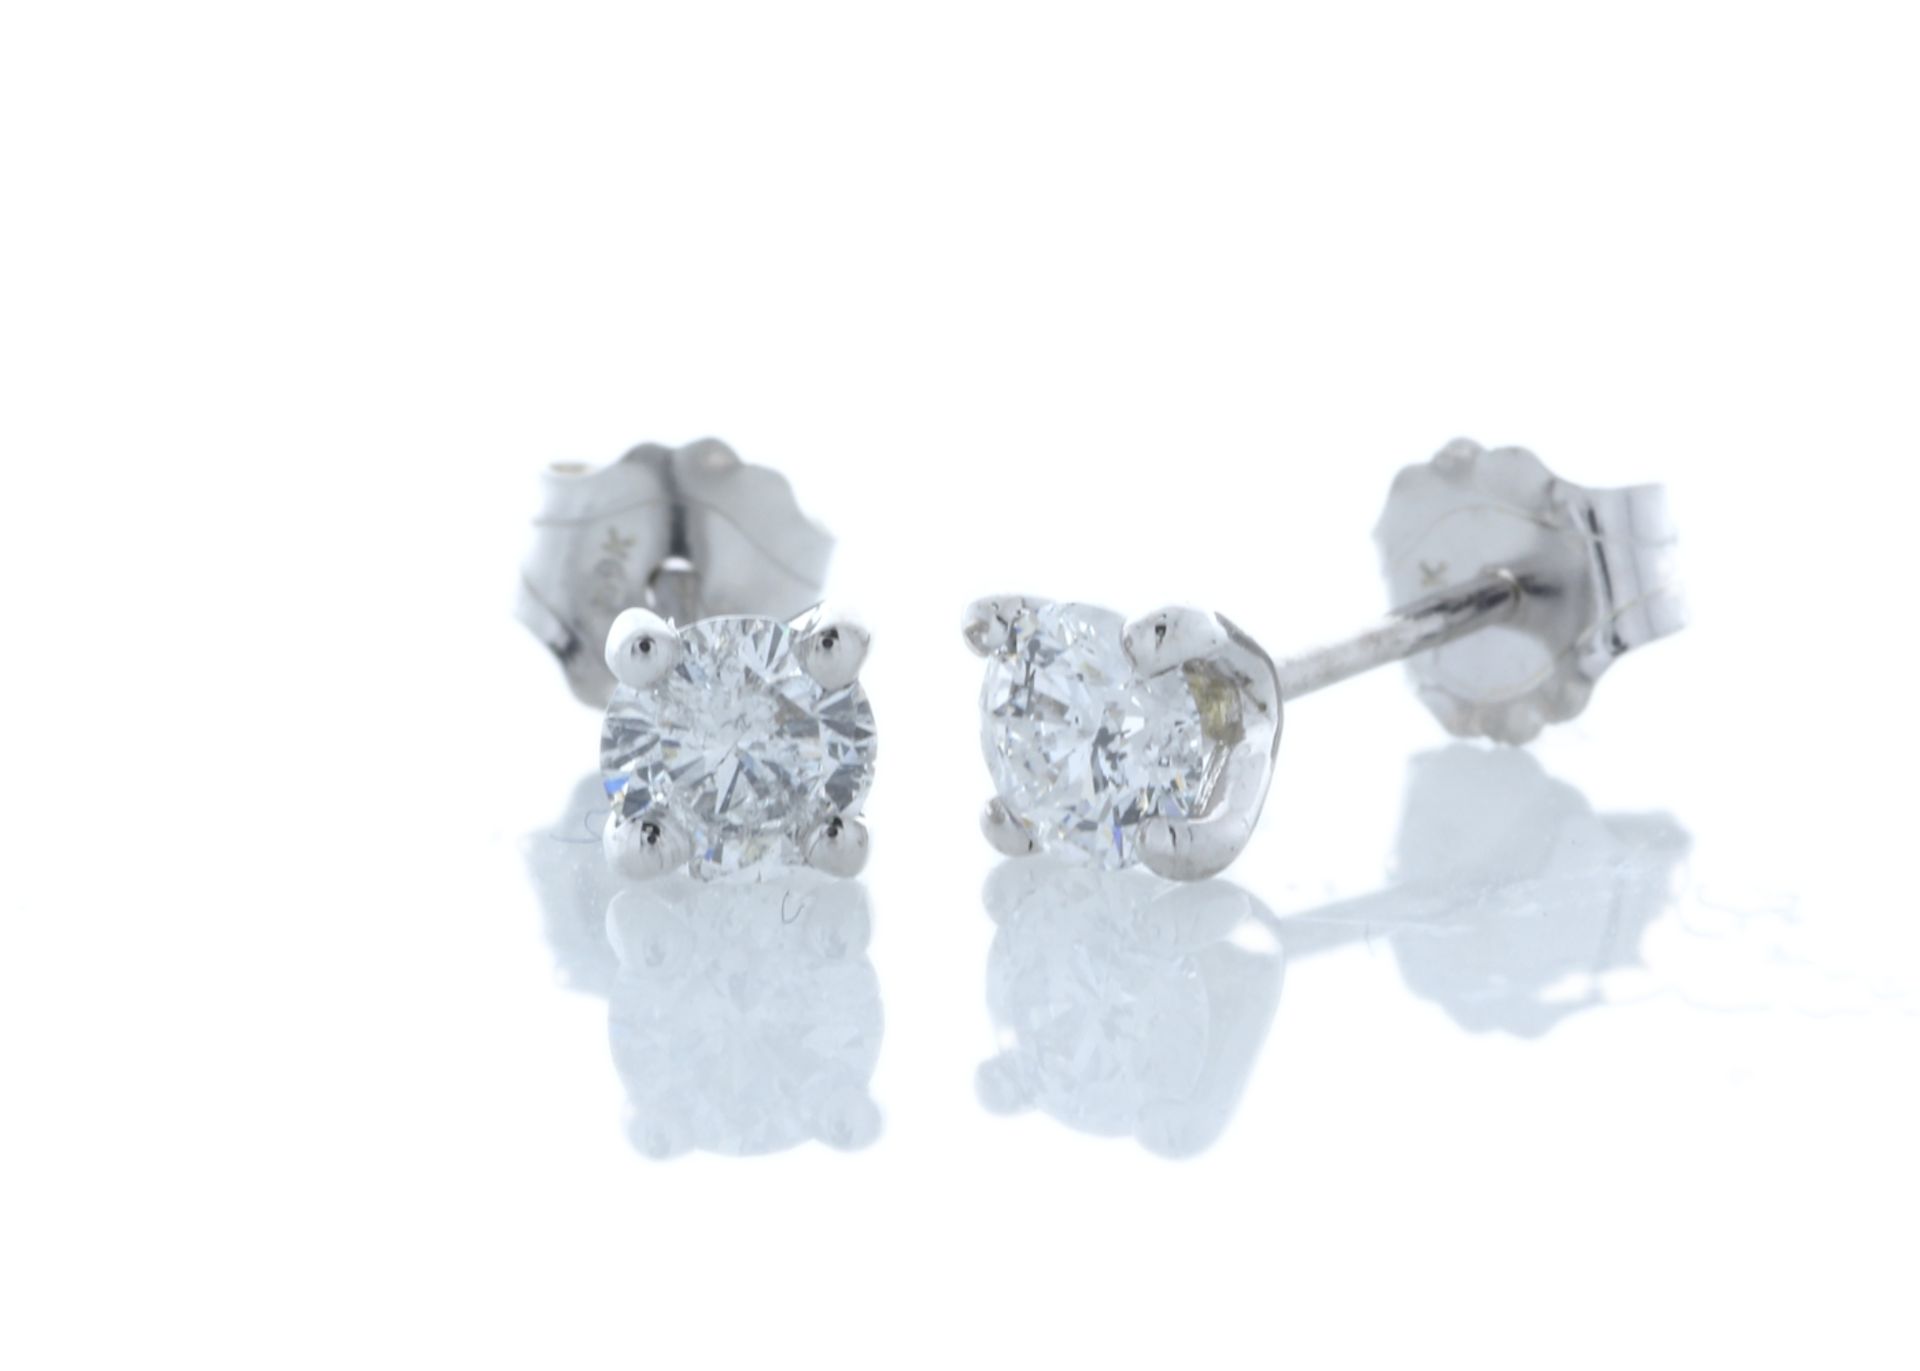 9ct White Gold Single Stone Claw Set Diamond Earring 0.42 Carats - Valued by GIE £3,450.00 - 9ct - Image 2 of 3